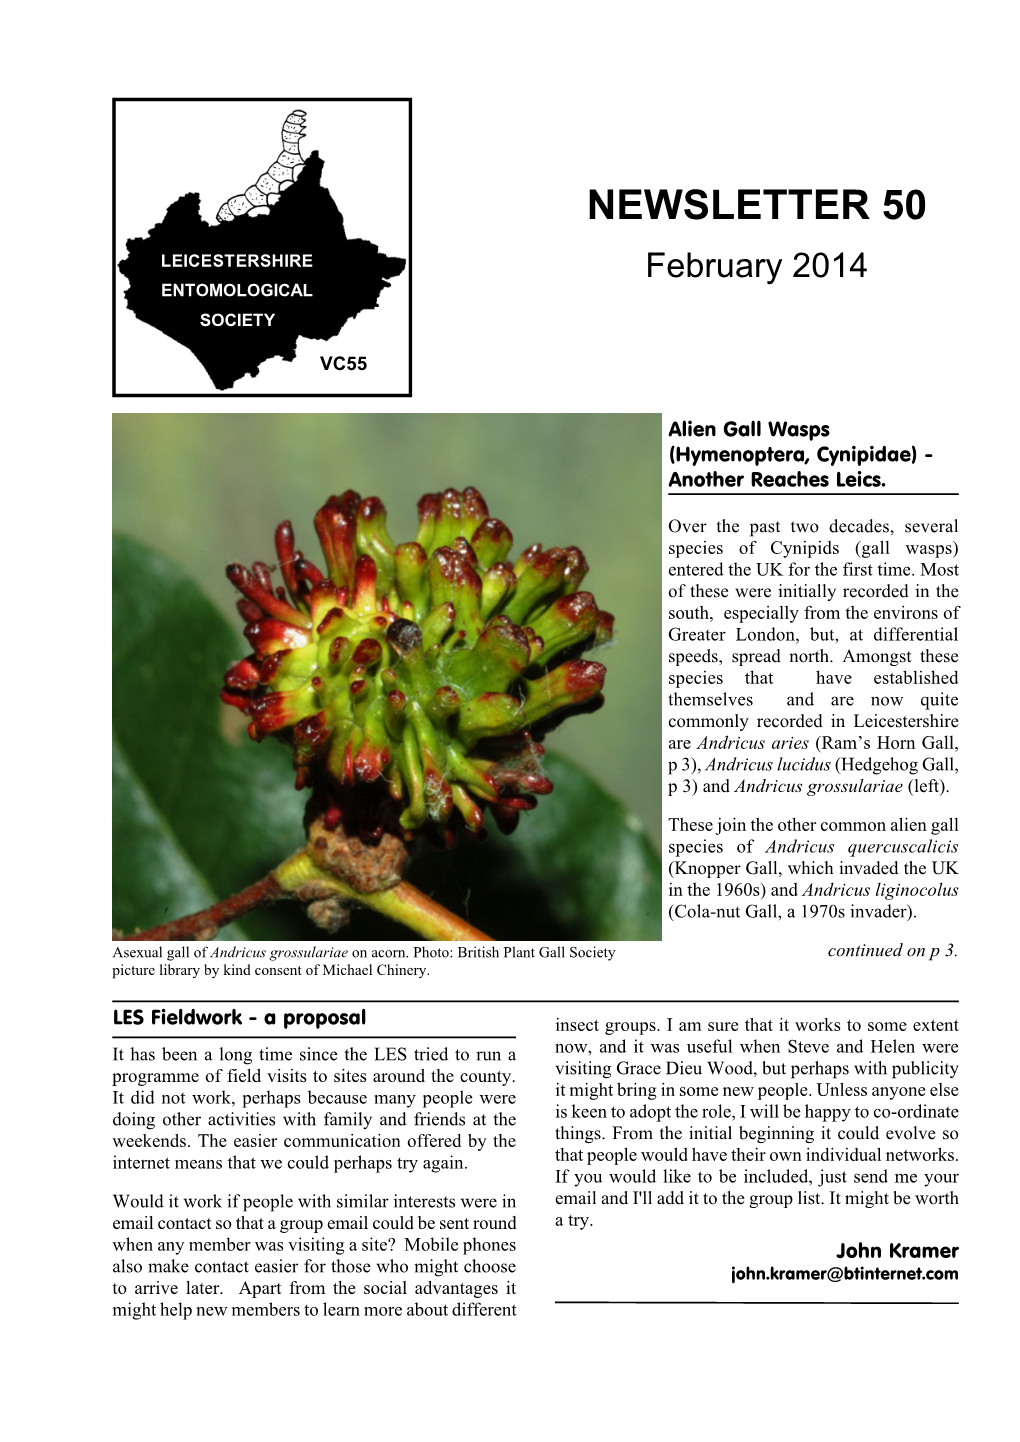 NEWSLETTER 50 LEICESTERSHIRE February 2014 ENTOMOLOGICAL SOCIETY